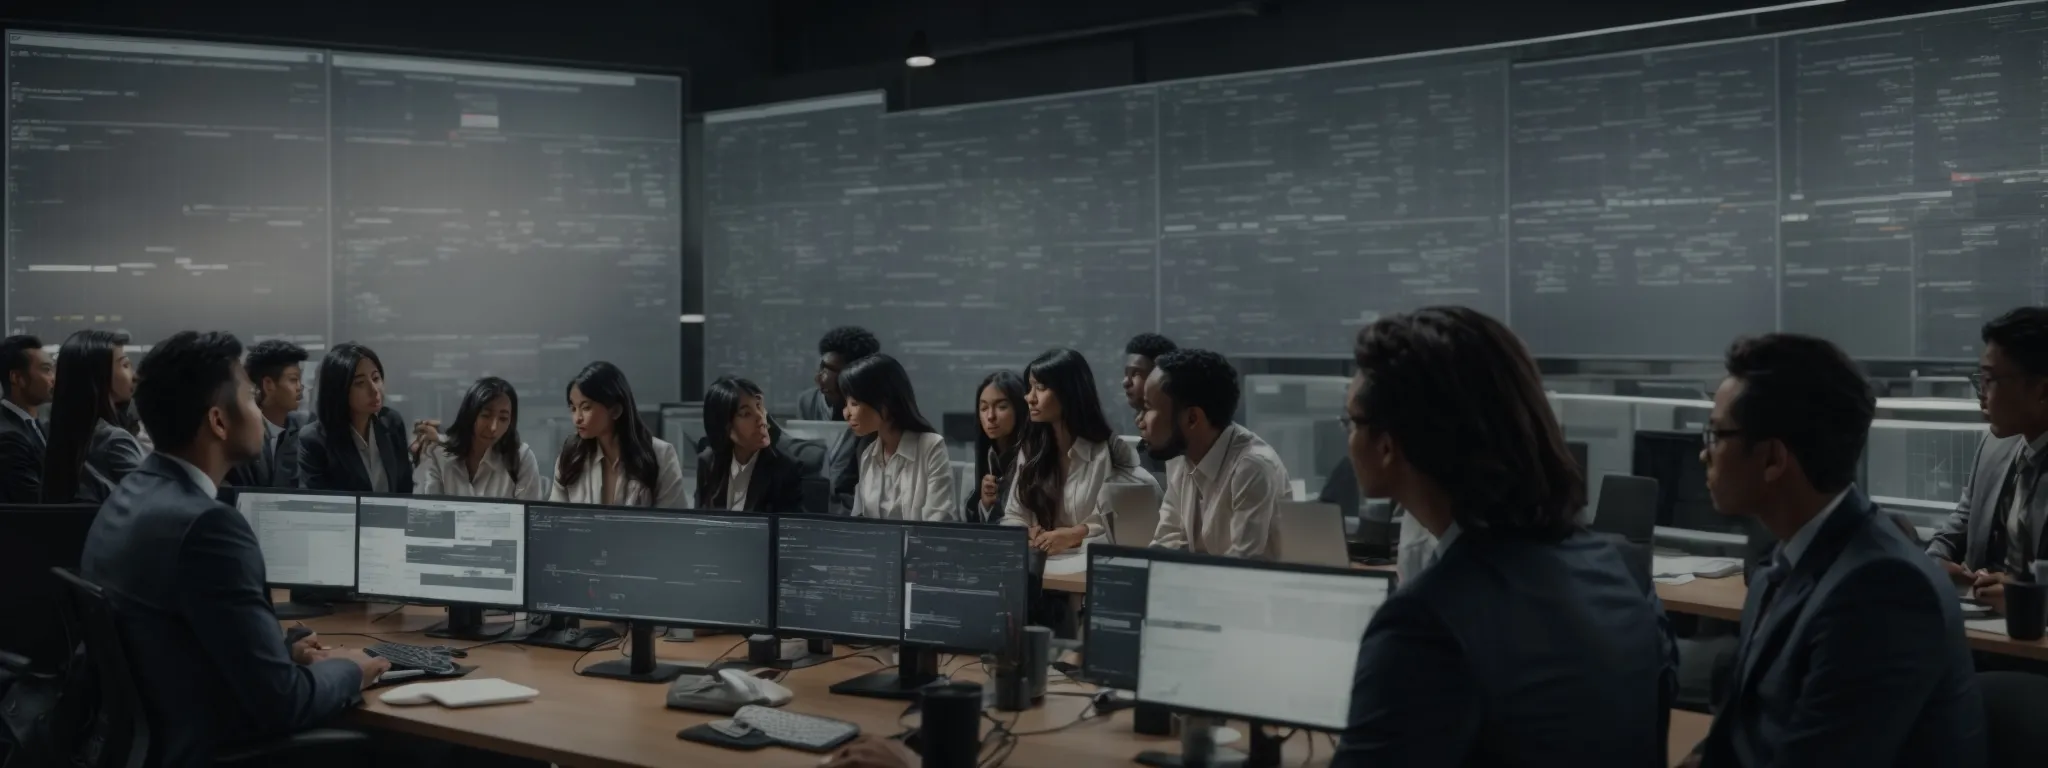 a diverse group of people in a modern office intently studies a large screen displaying a complex flowchart of algorithms.